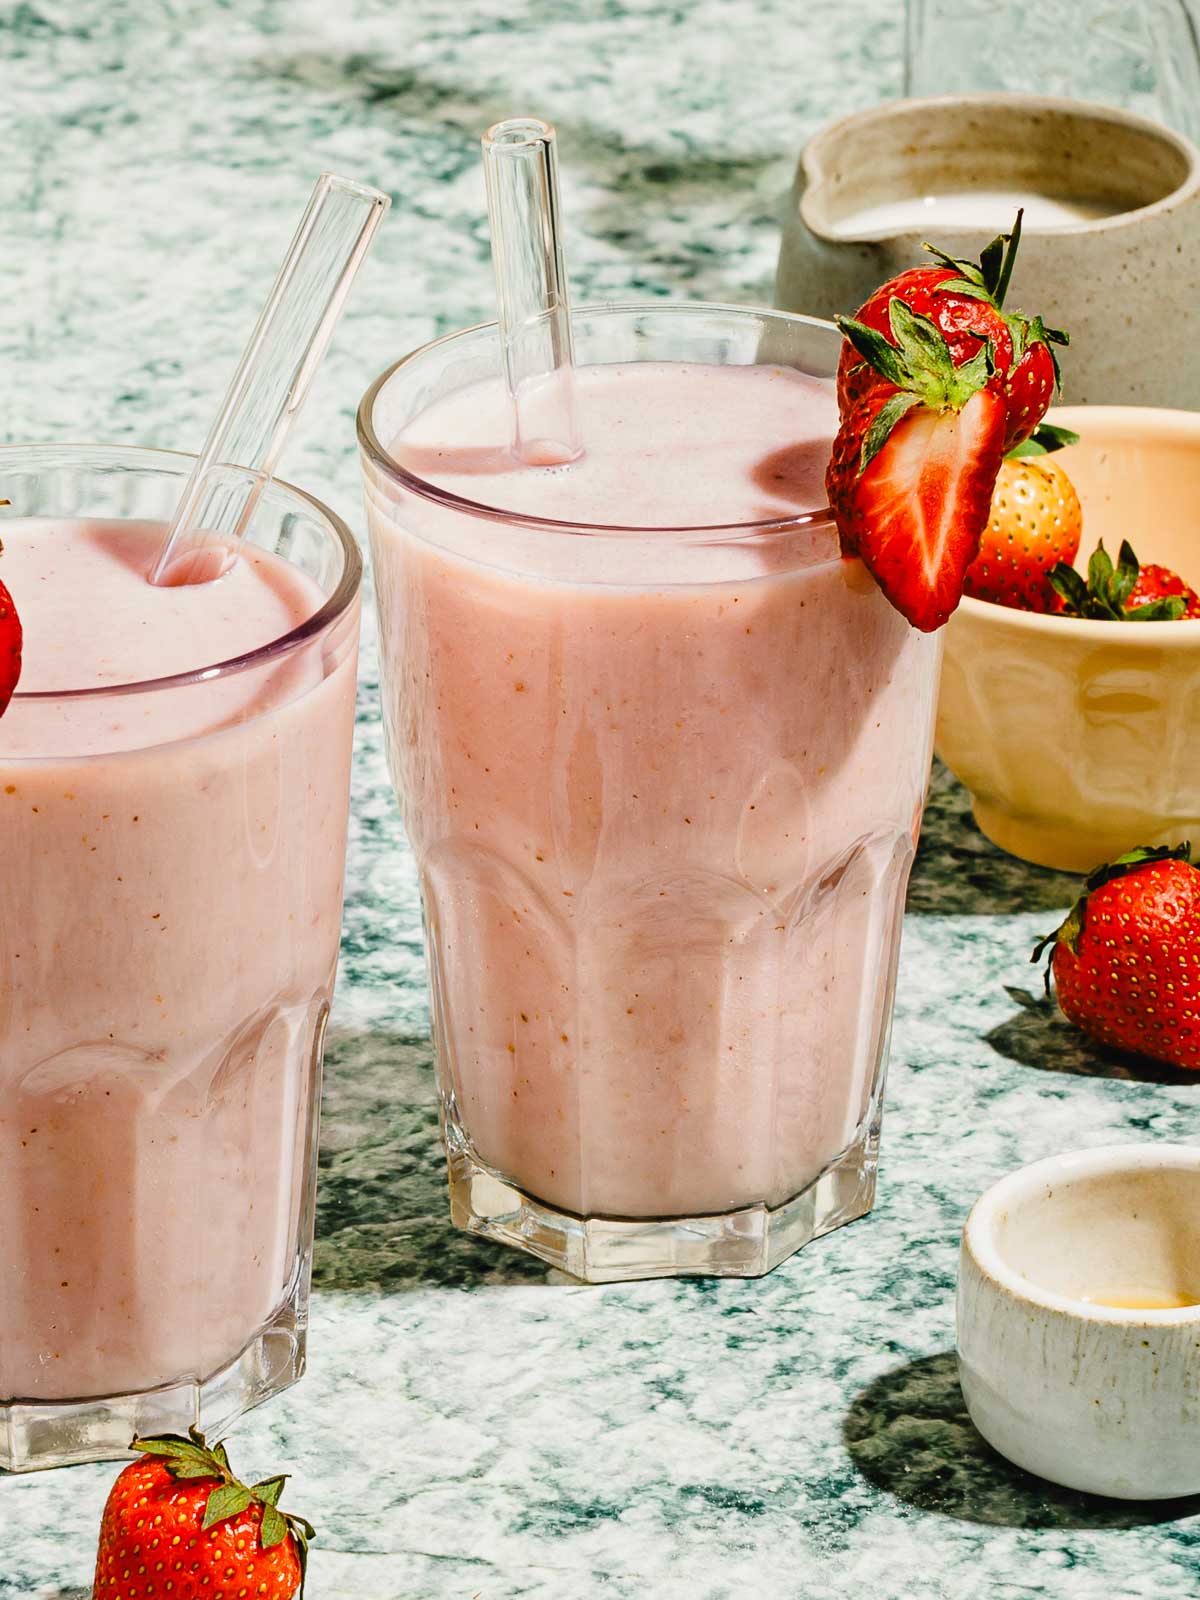 Image shows two glasses of strawberry almond milk serve chilled with strawberries on top.